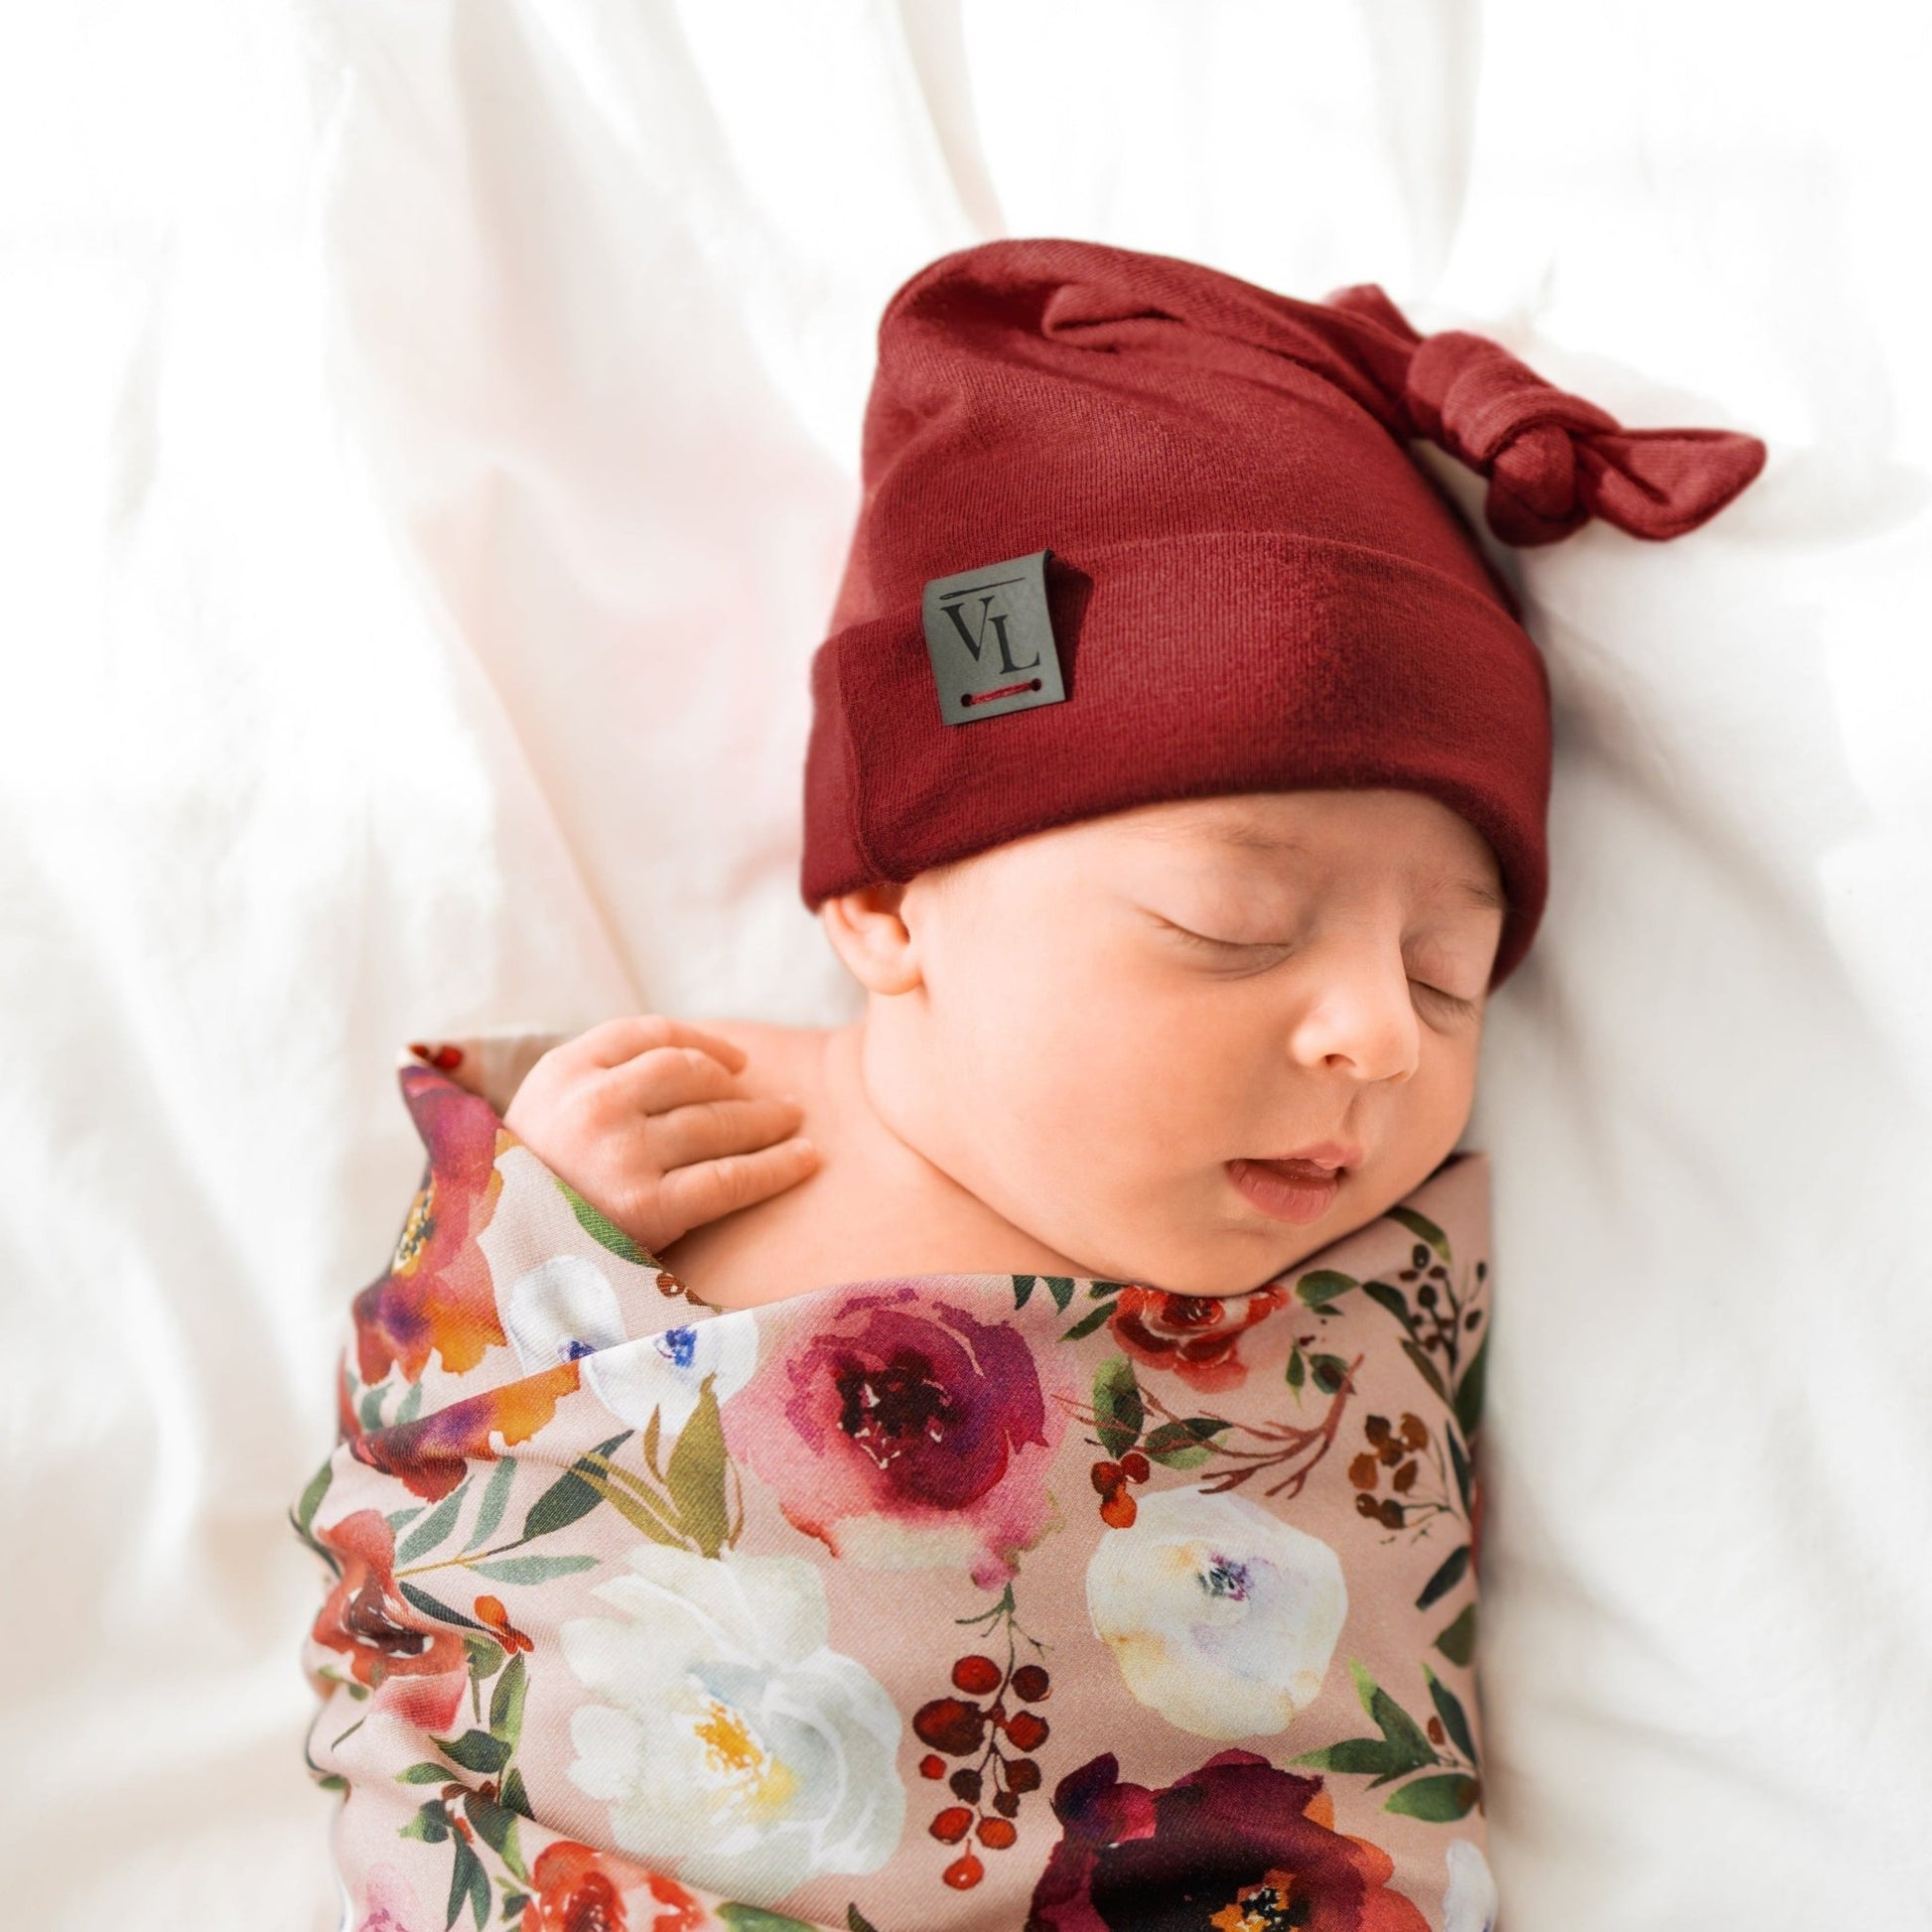 Top Knot Hat in Raspberry - Bright Earth Apparel